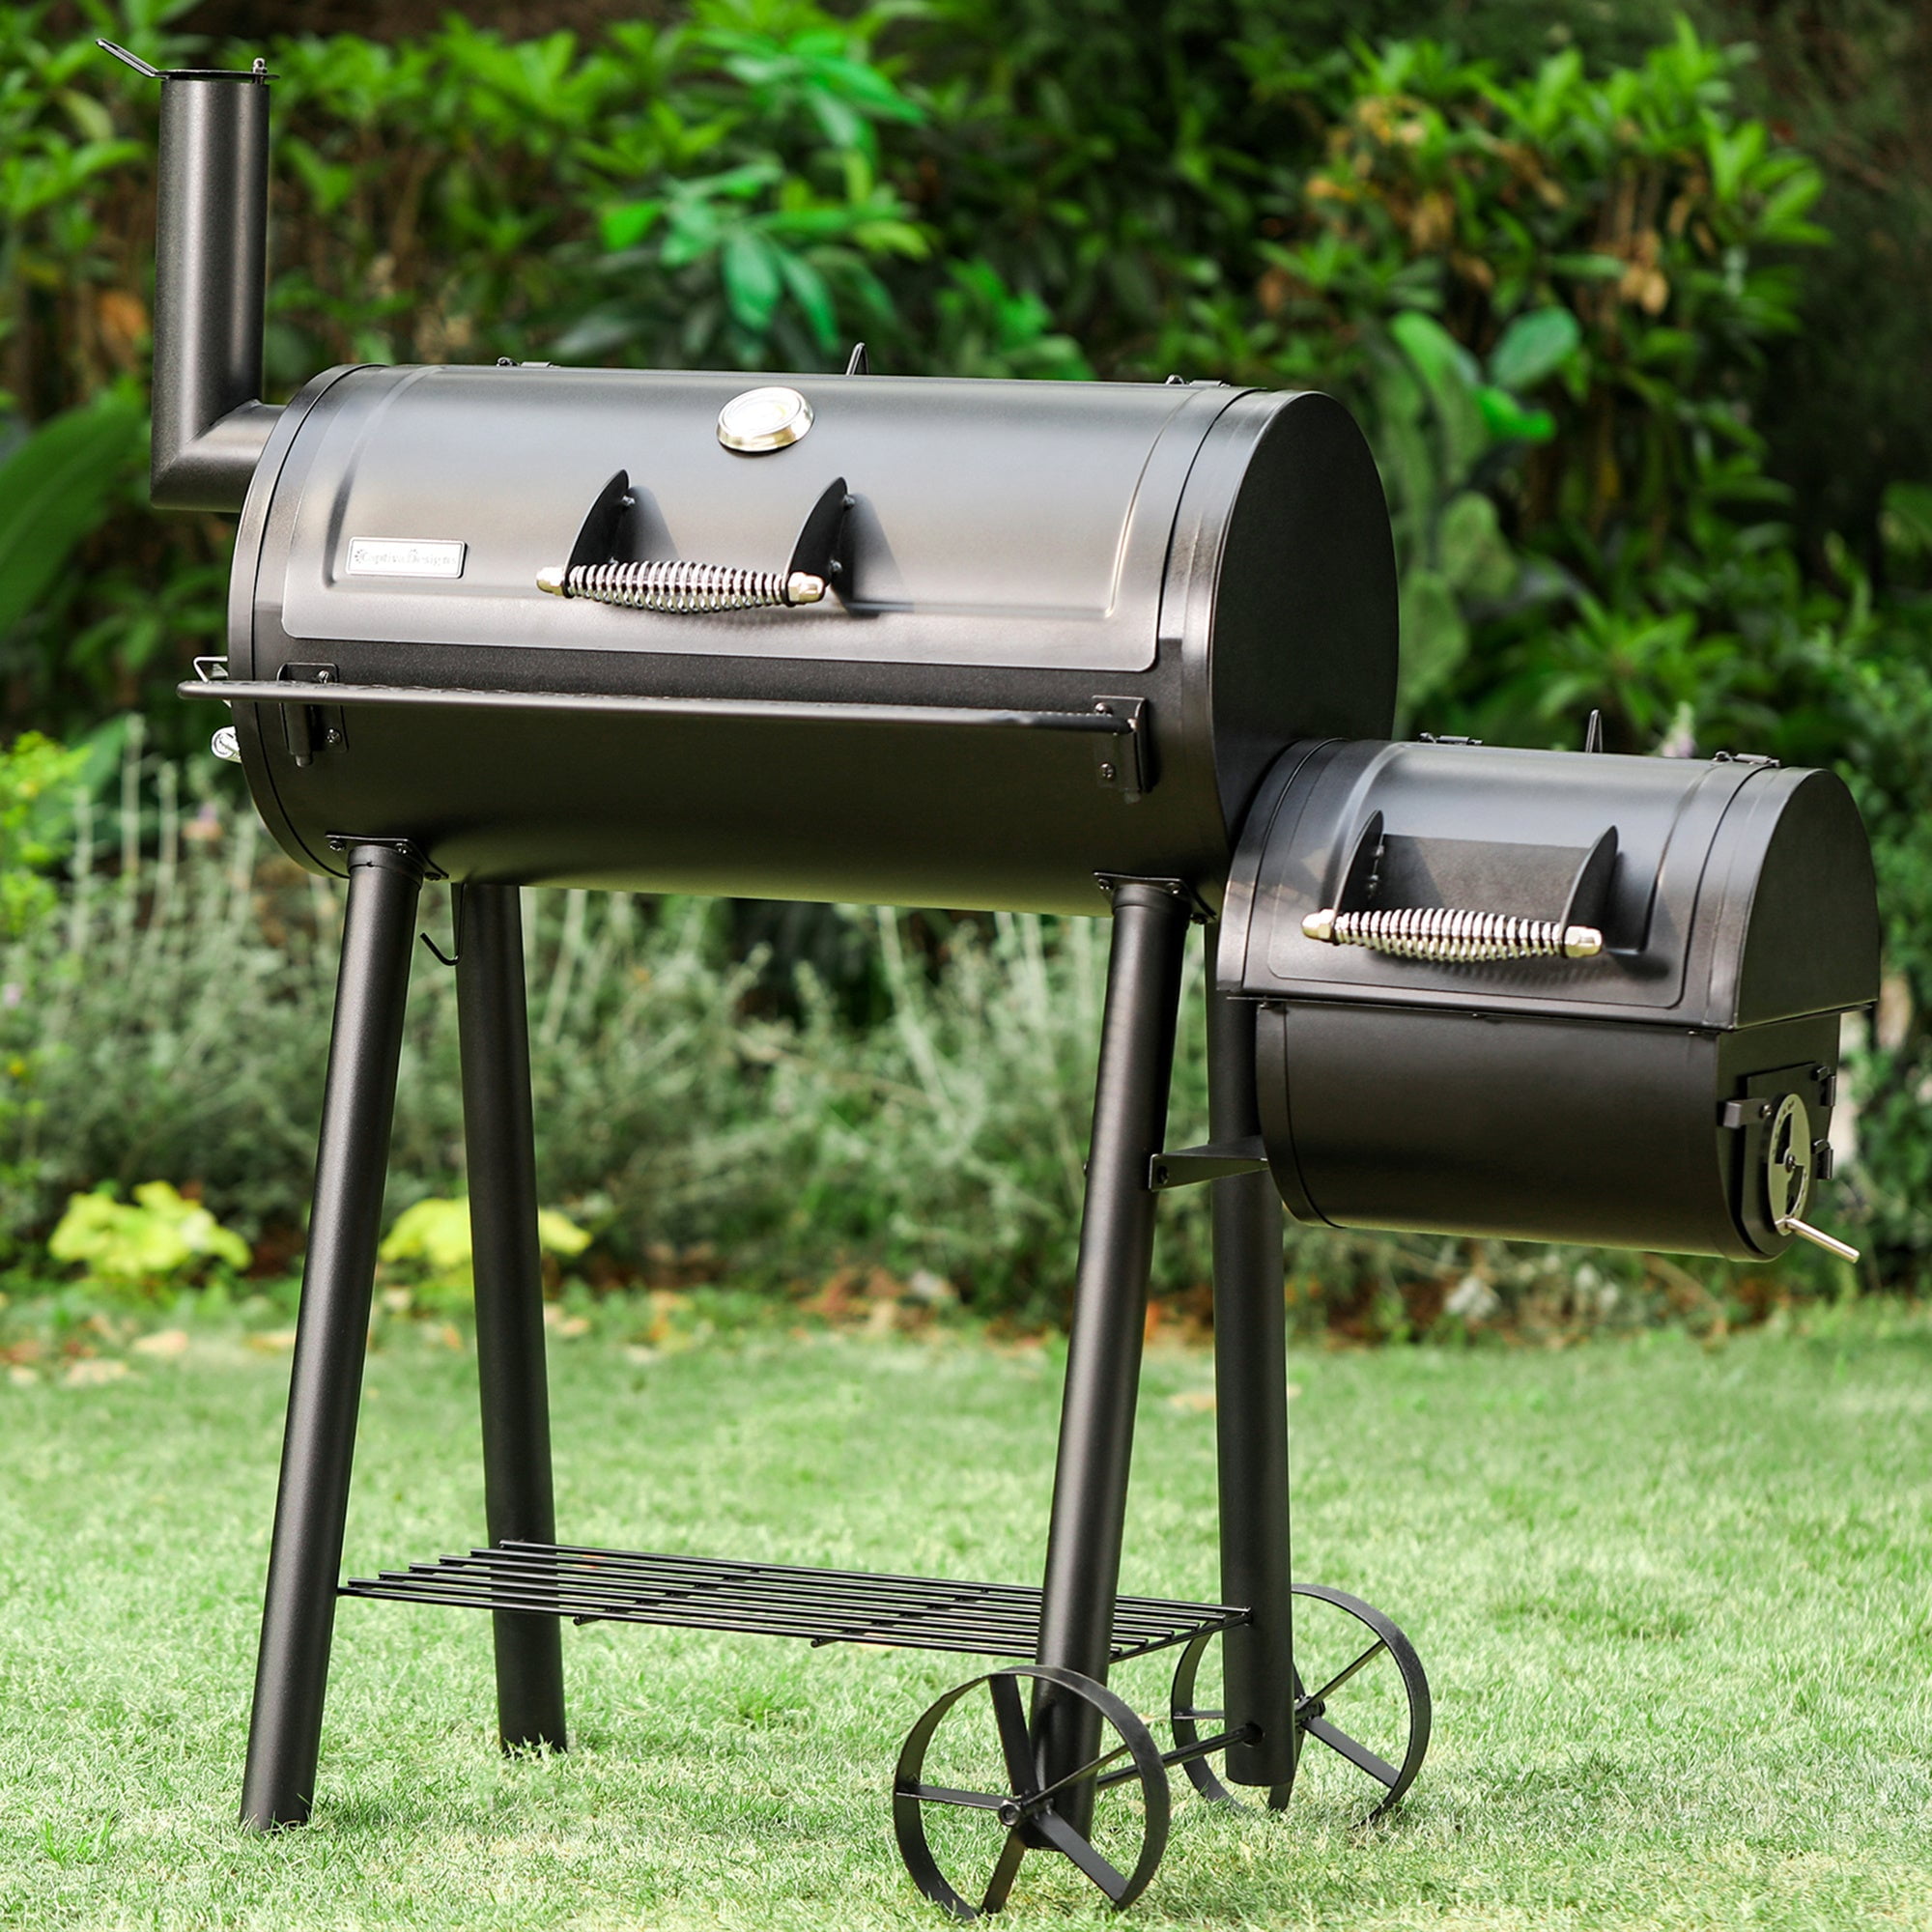 detekterbare Specialisere Mantle Sophia & William Portable BBQ Charcoal Grill with Offset Smoker, Black -  Walmart.com